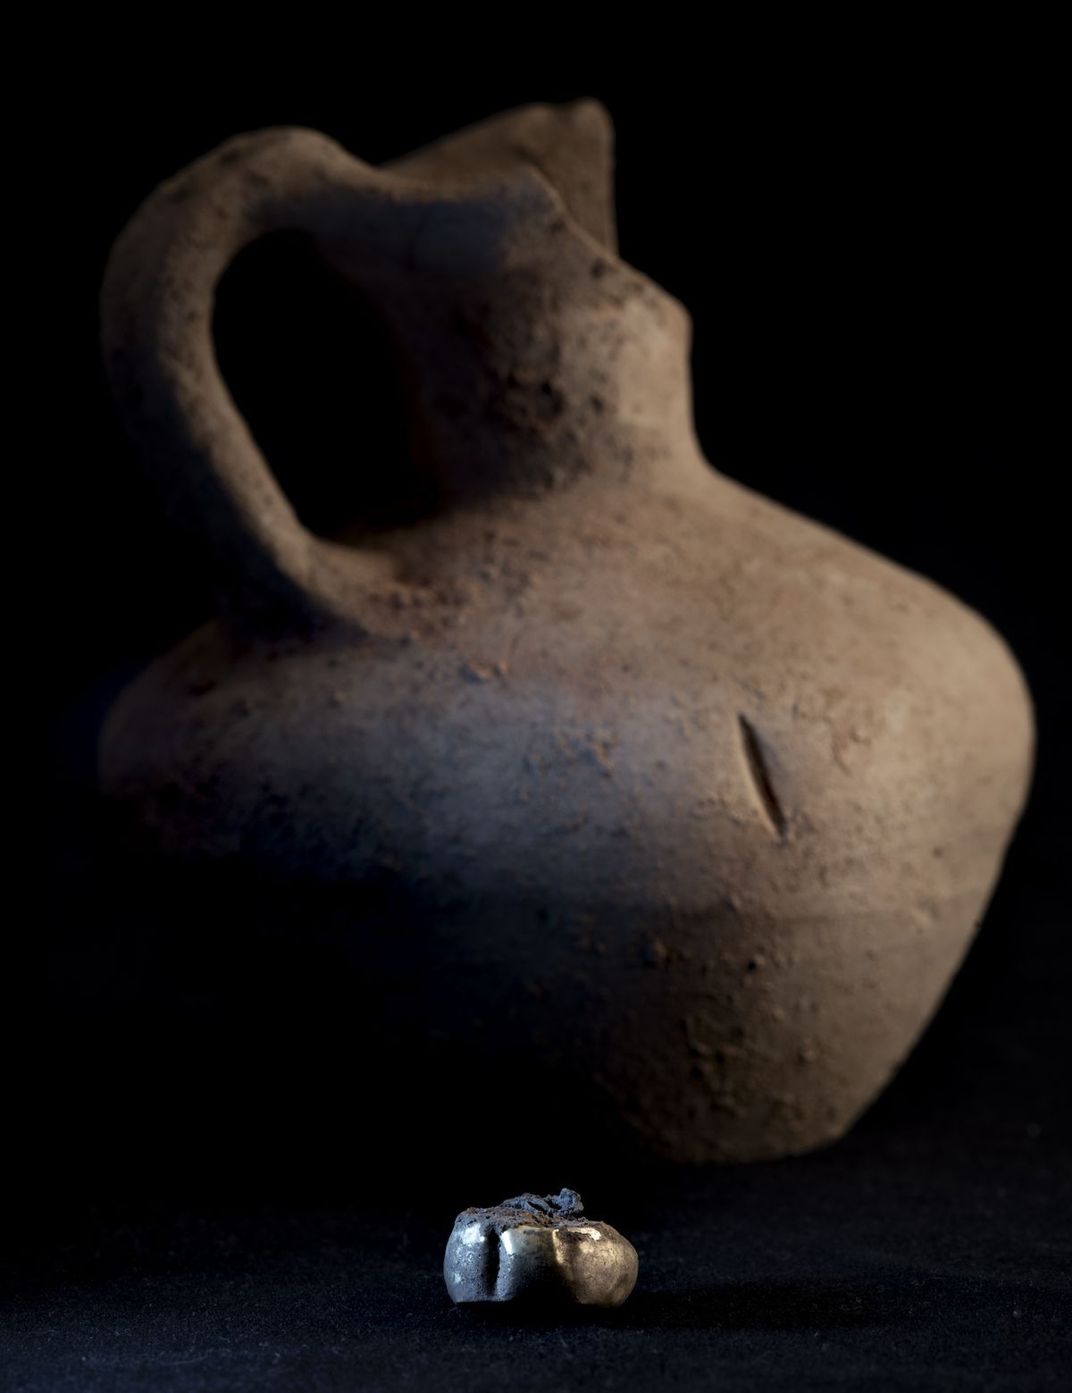 A gold earring in the foreground, with a brown pot in the background.